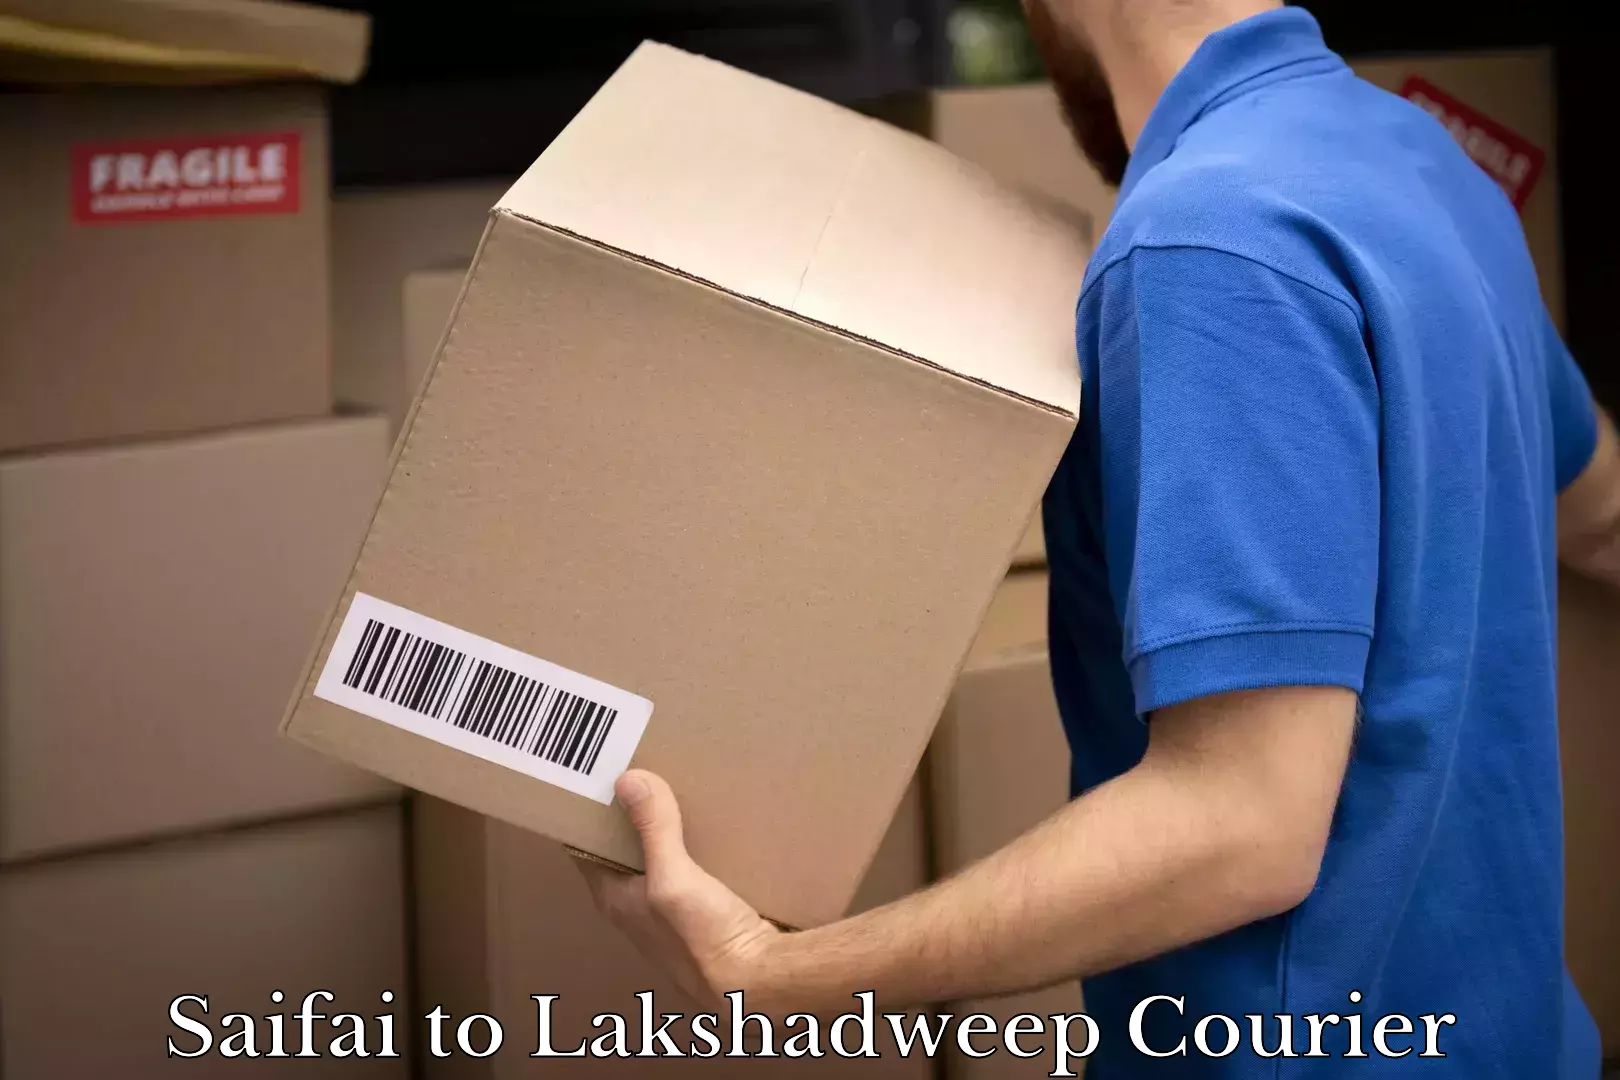 State-of-the-art courier technology Saifai to Lakshadweep